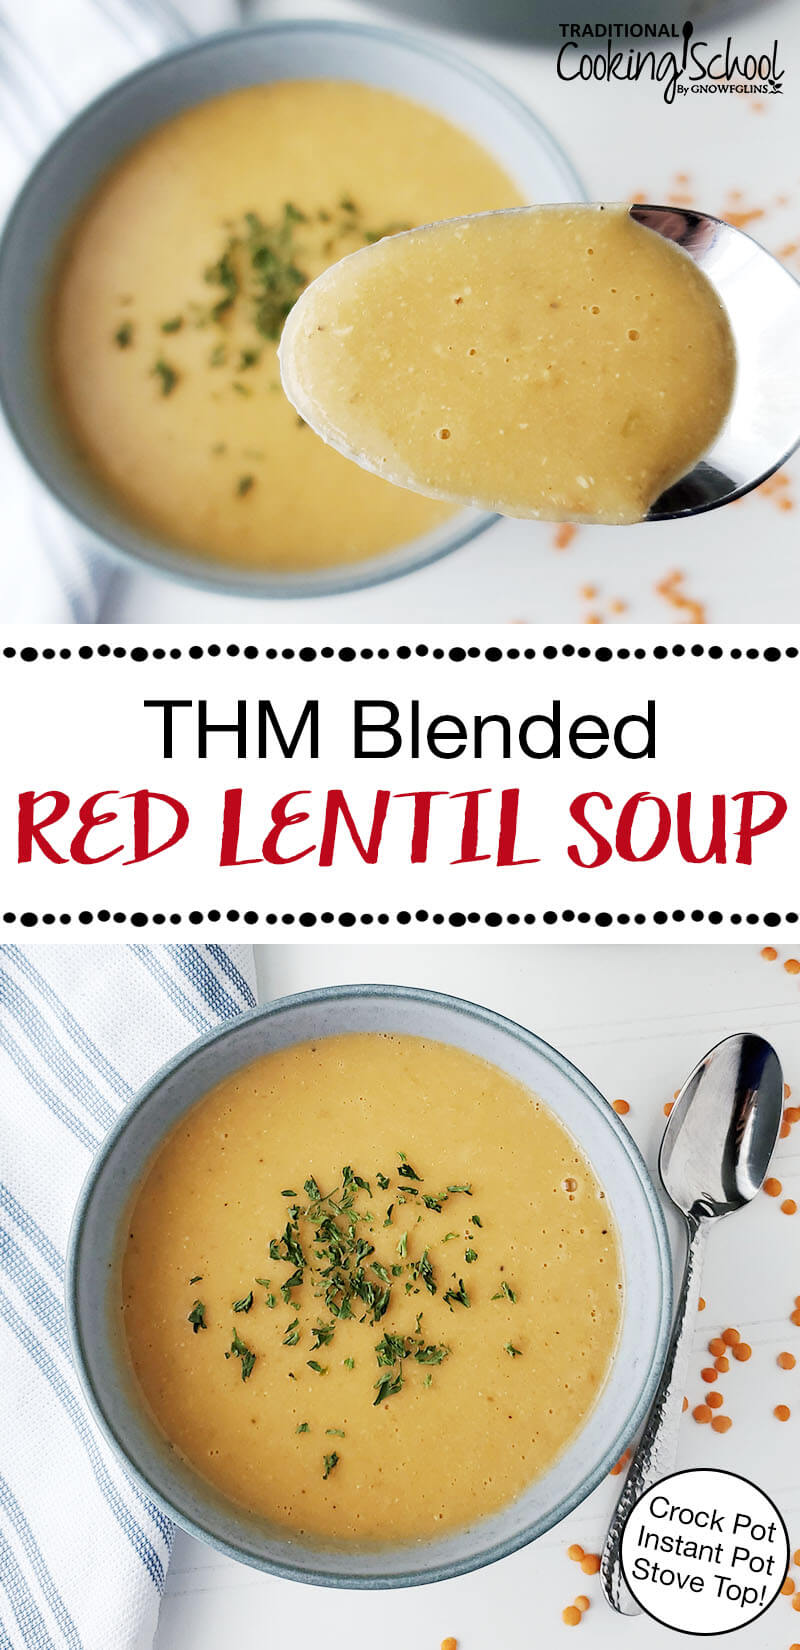 photo collage of creamy blended soup garnished with herbs, with text overlay: "THM Blended Red Lentil Soup (Crock Pot, Instant Pot, Stove Top!)"